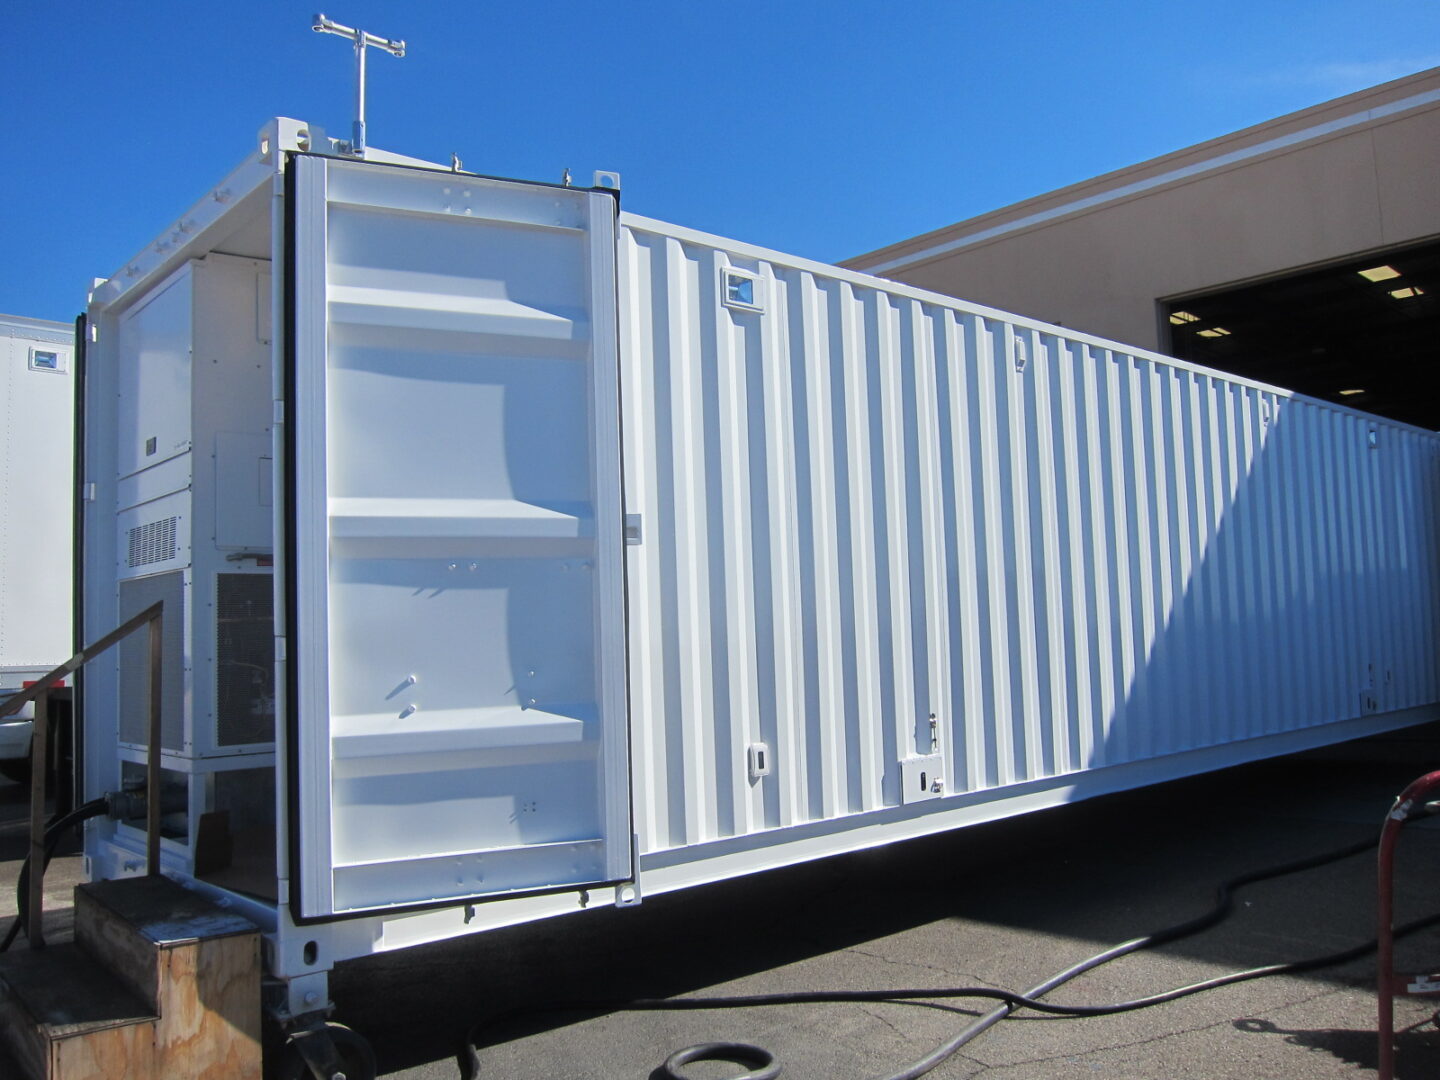 A mobile shelter with an all-white exterior